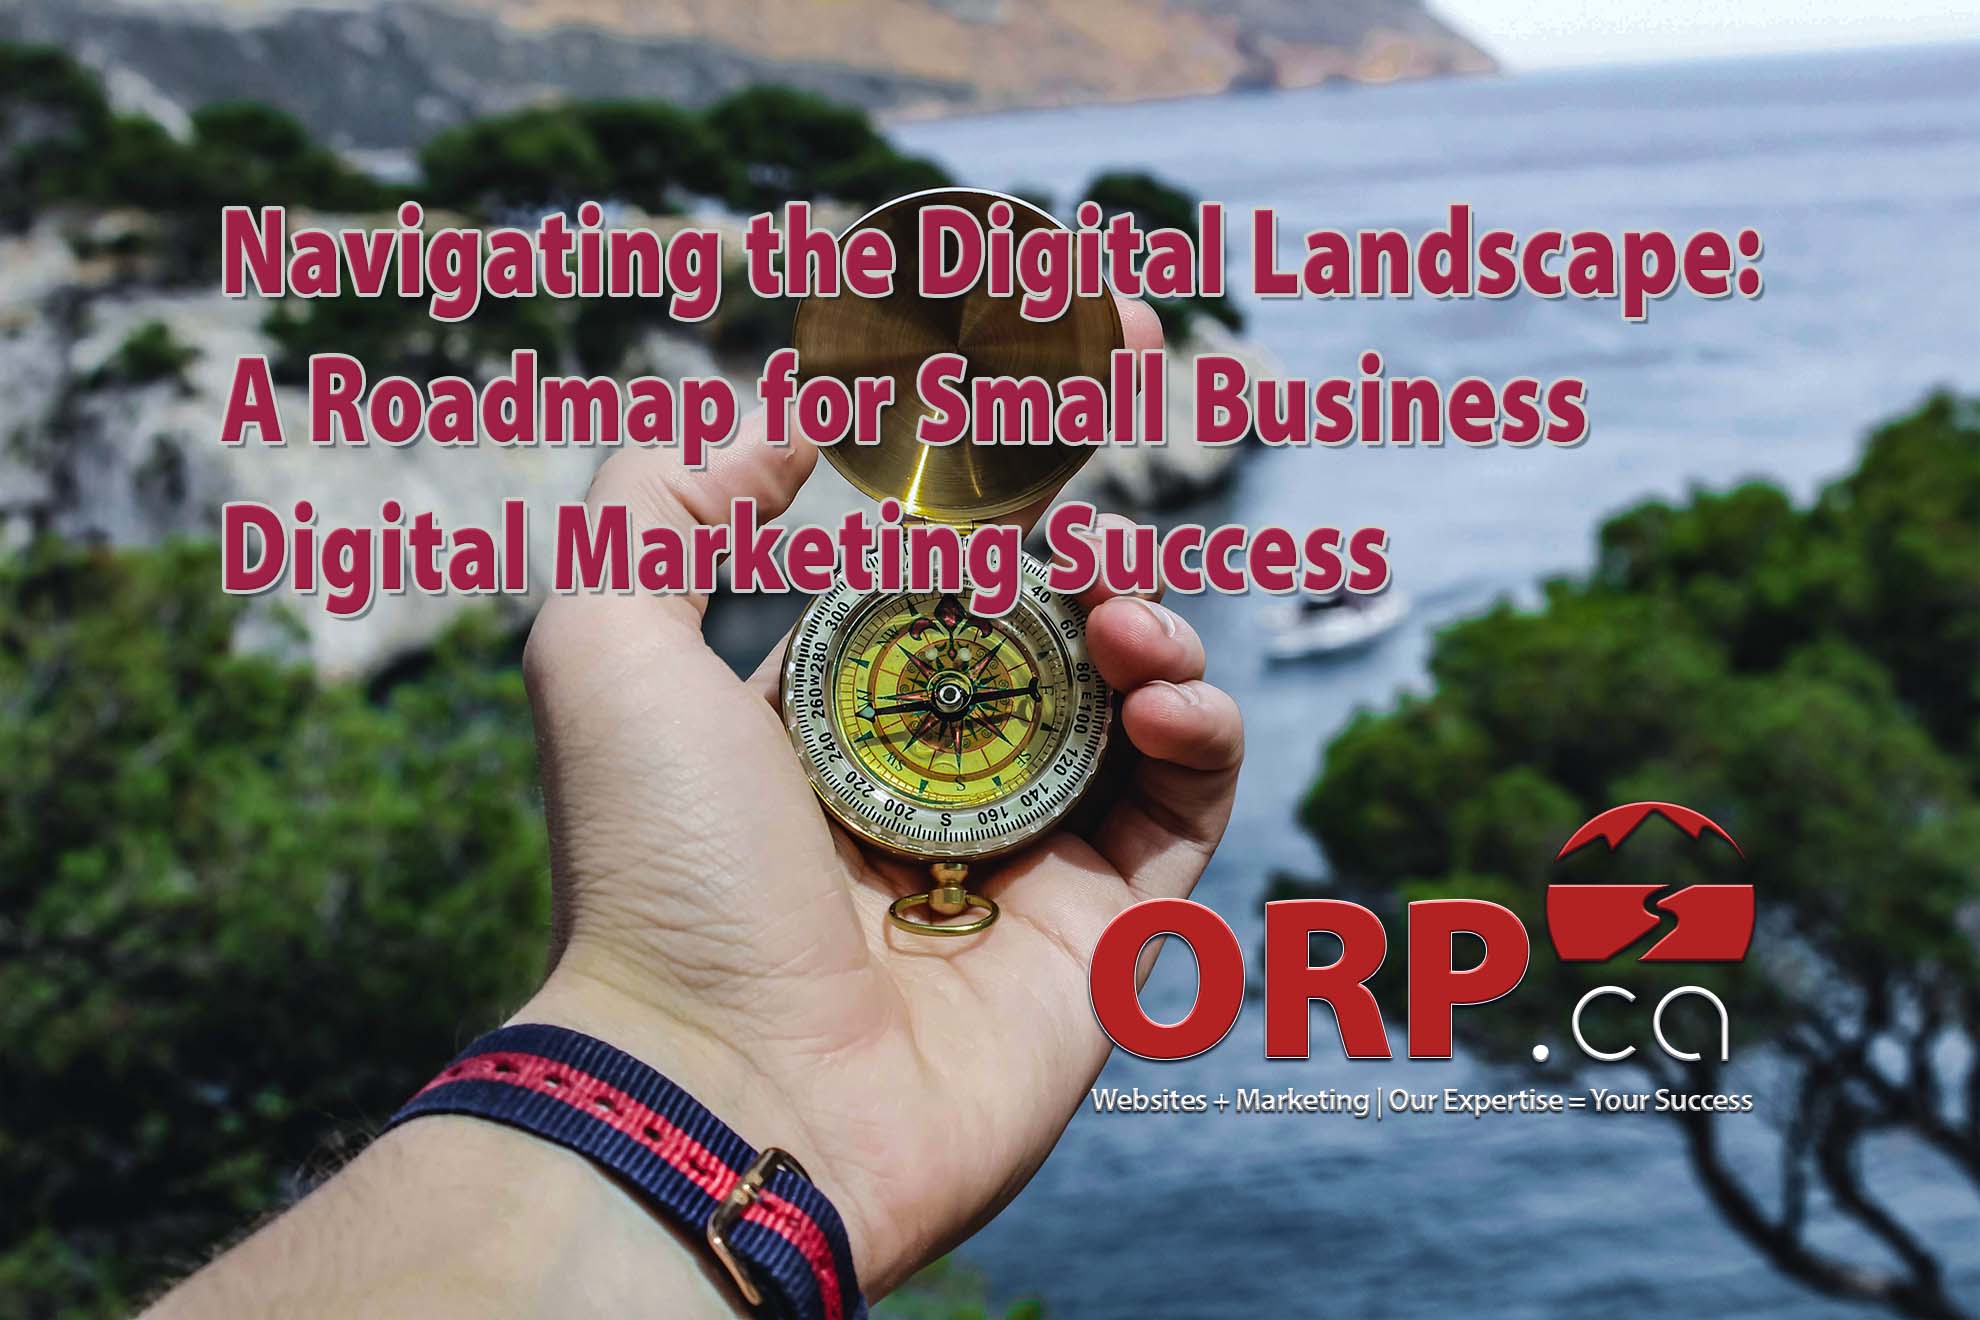 Navigating the Digital Landscape: A Roadmap for Small Business Digital Marketing Success  - a small business digital marketing article from ORP.ca, Your Small Business Website and Digital Marketing Services Provider